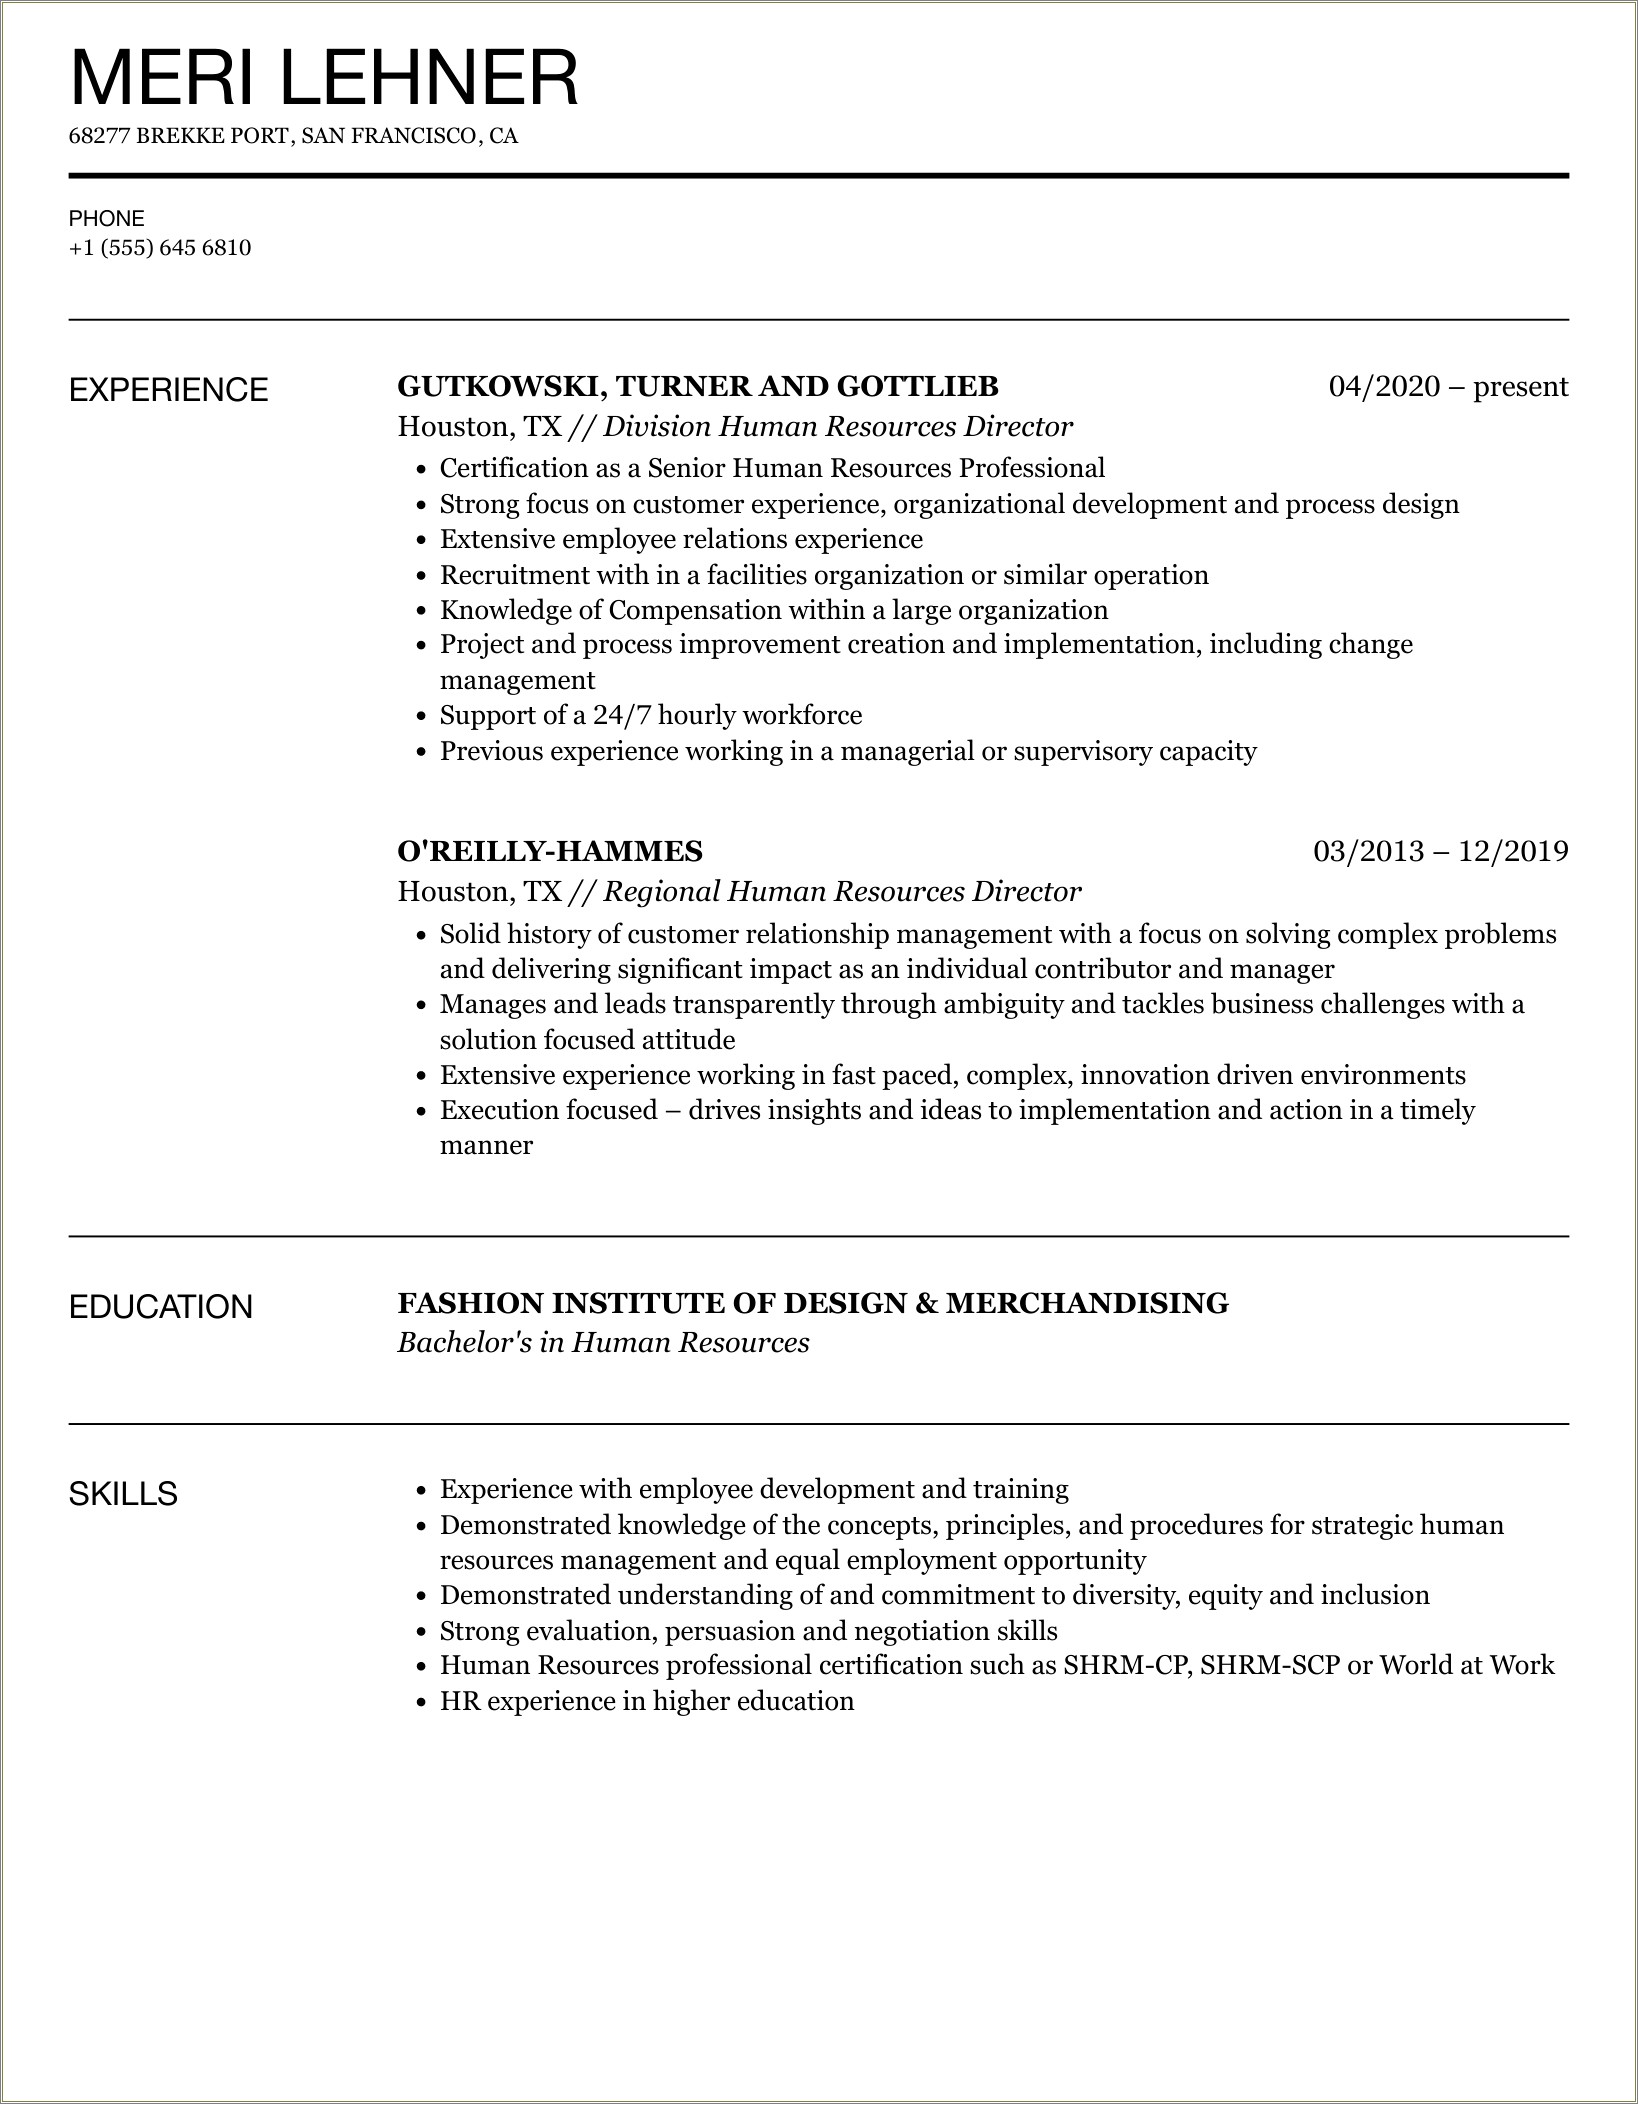 Human Resources Director Accomplishments Summary Resume Examples